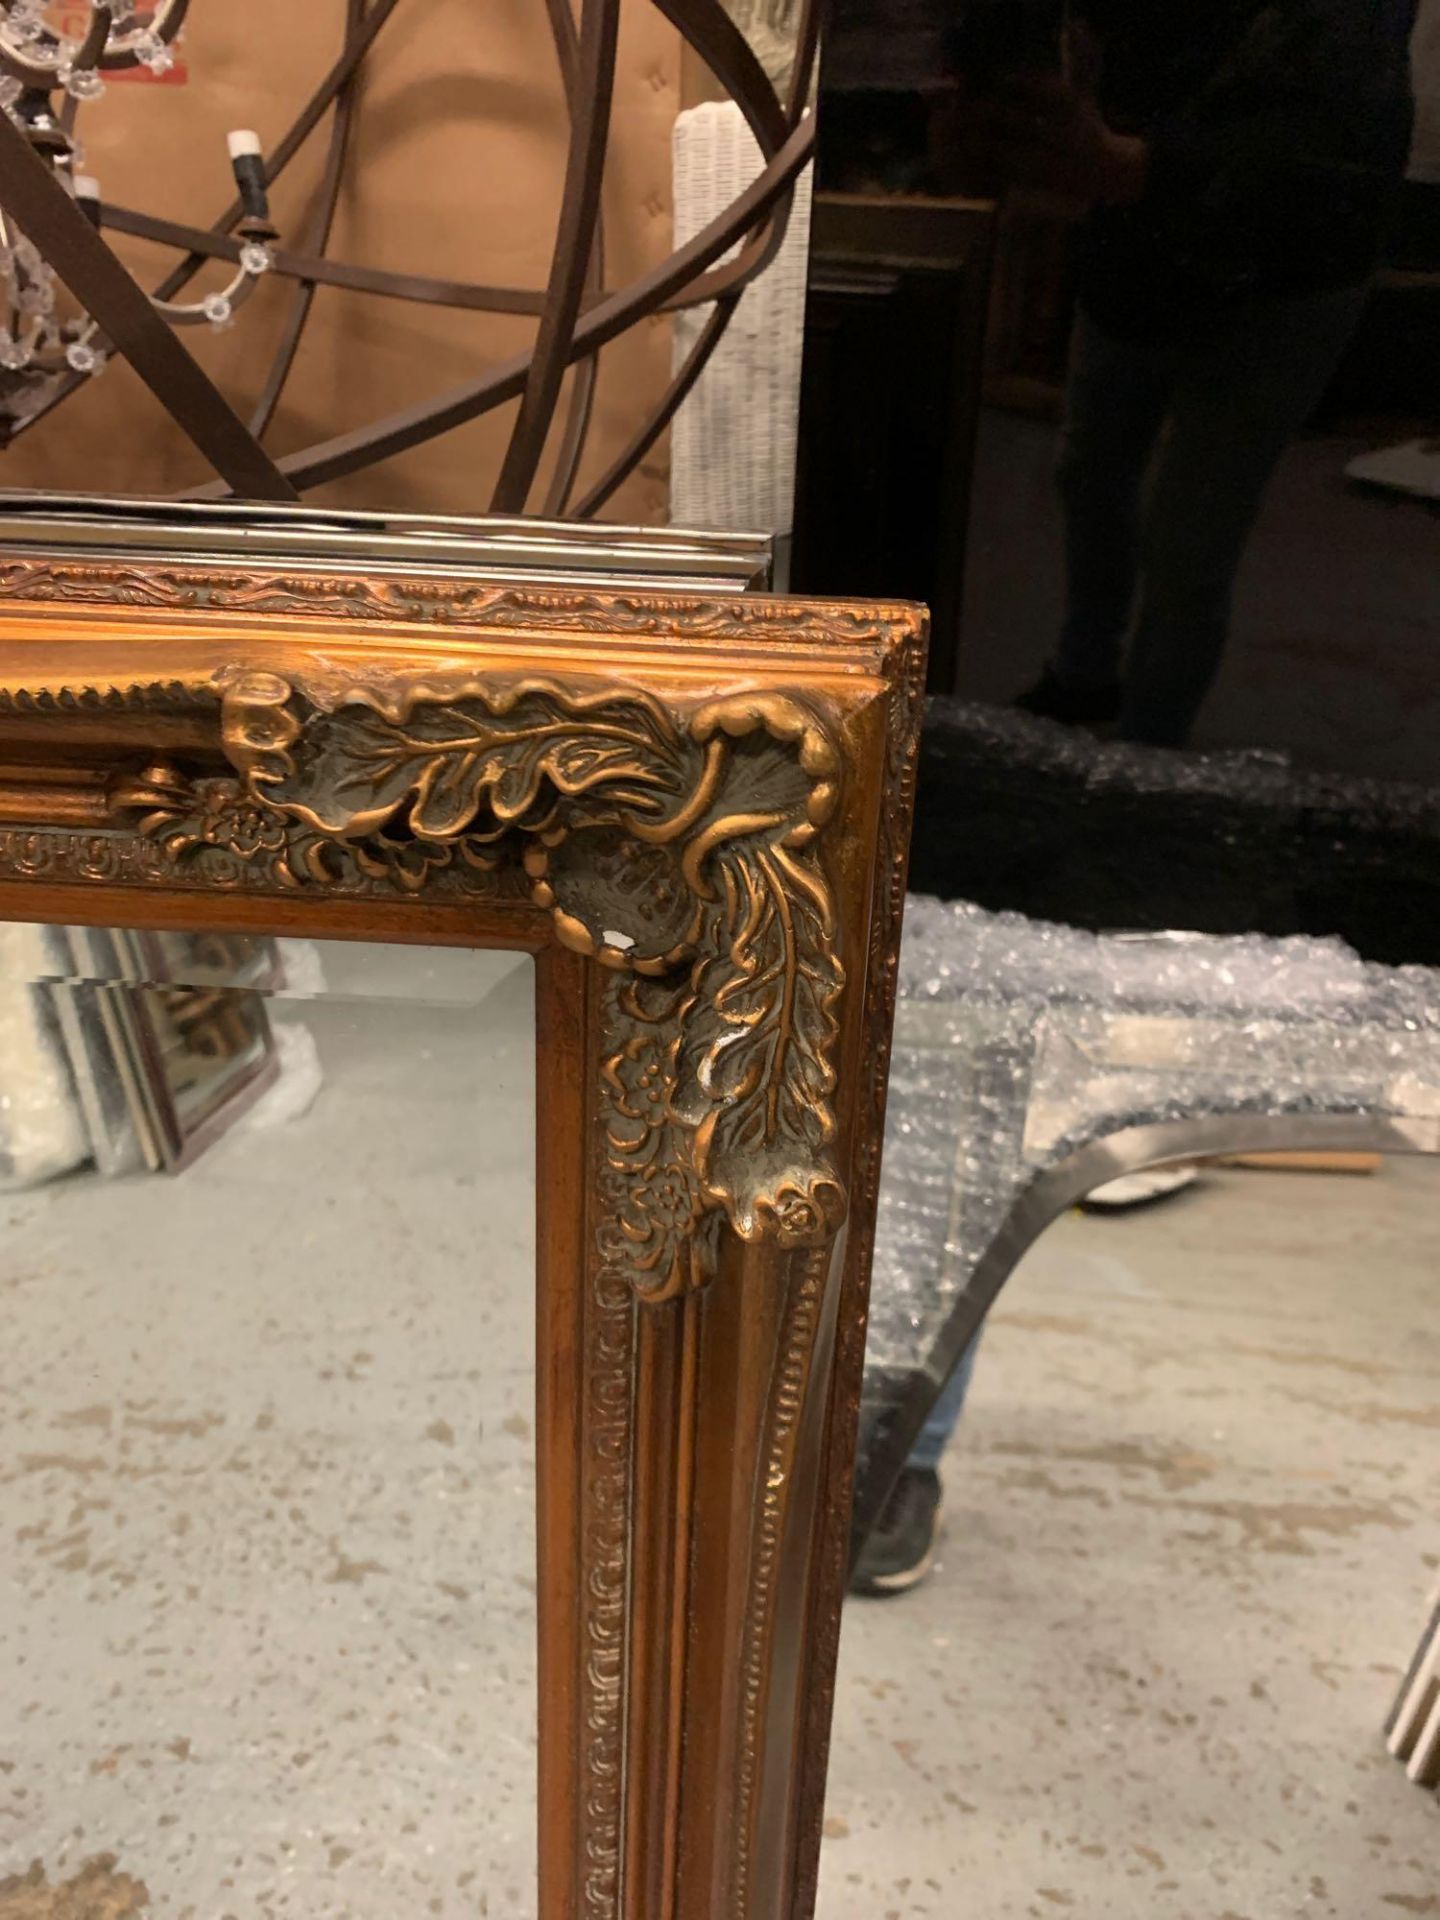 Rushden Bronze Rectangle Mirror 780 x 1080 mm An Ornate Baroque Inspired Wall Mirror In An Aged - Image 4 of 4